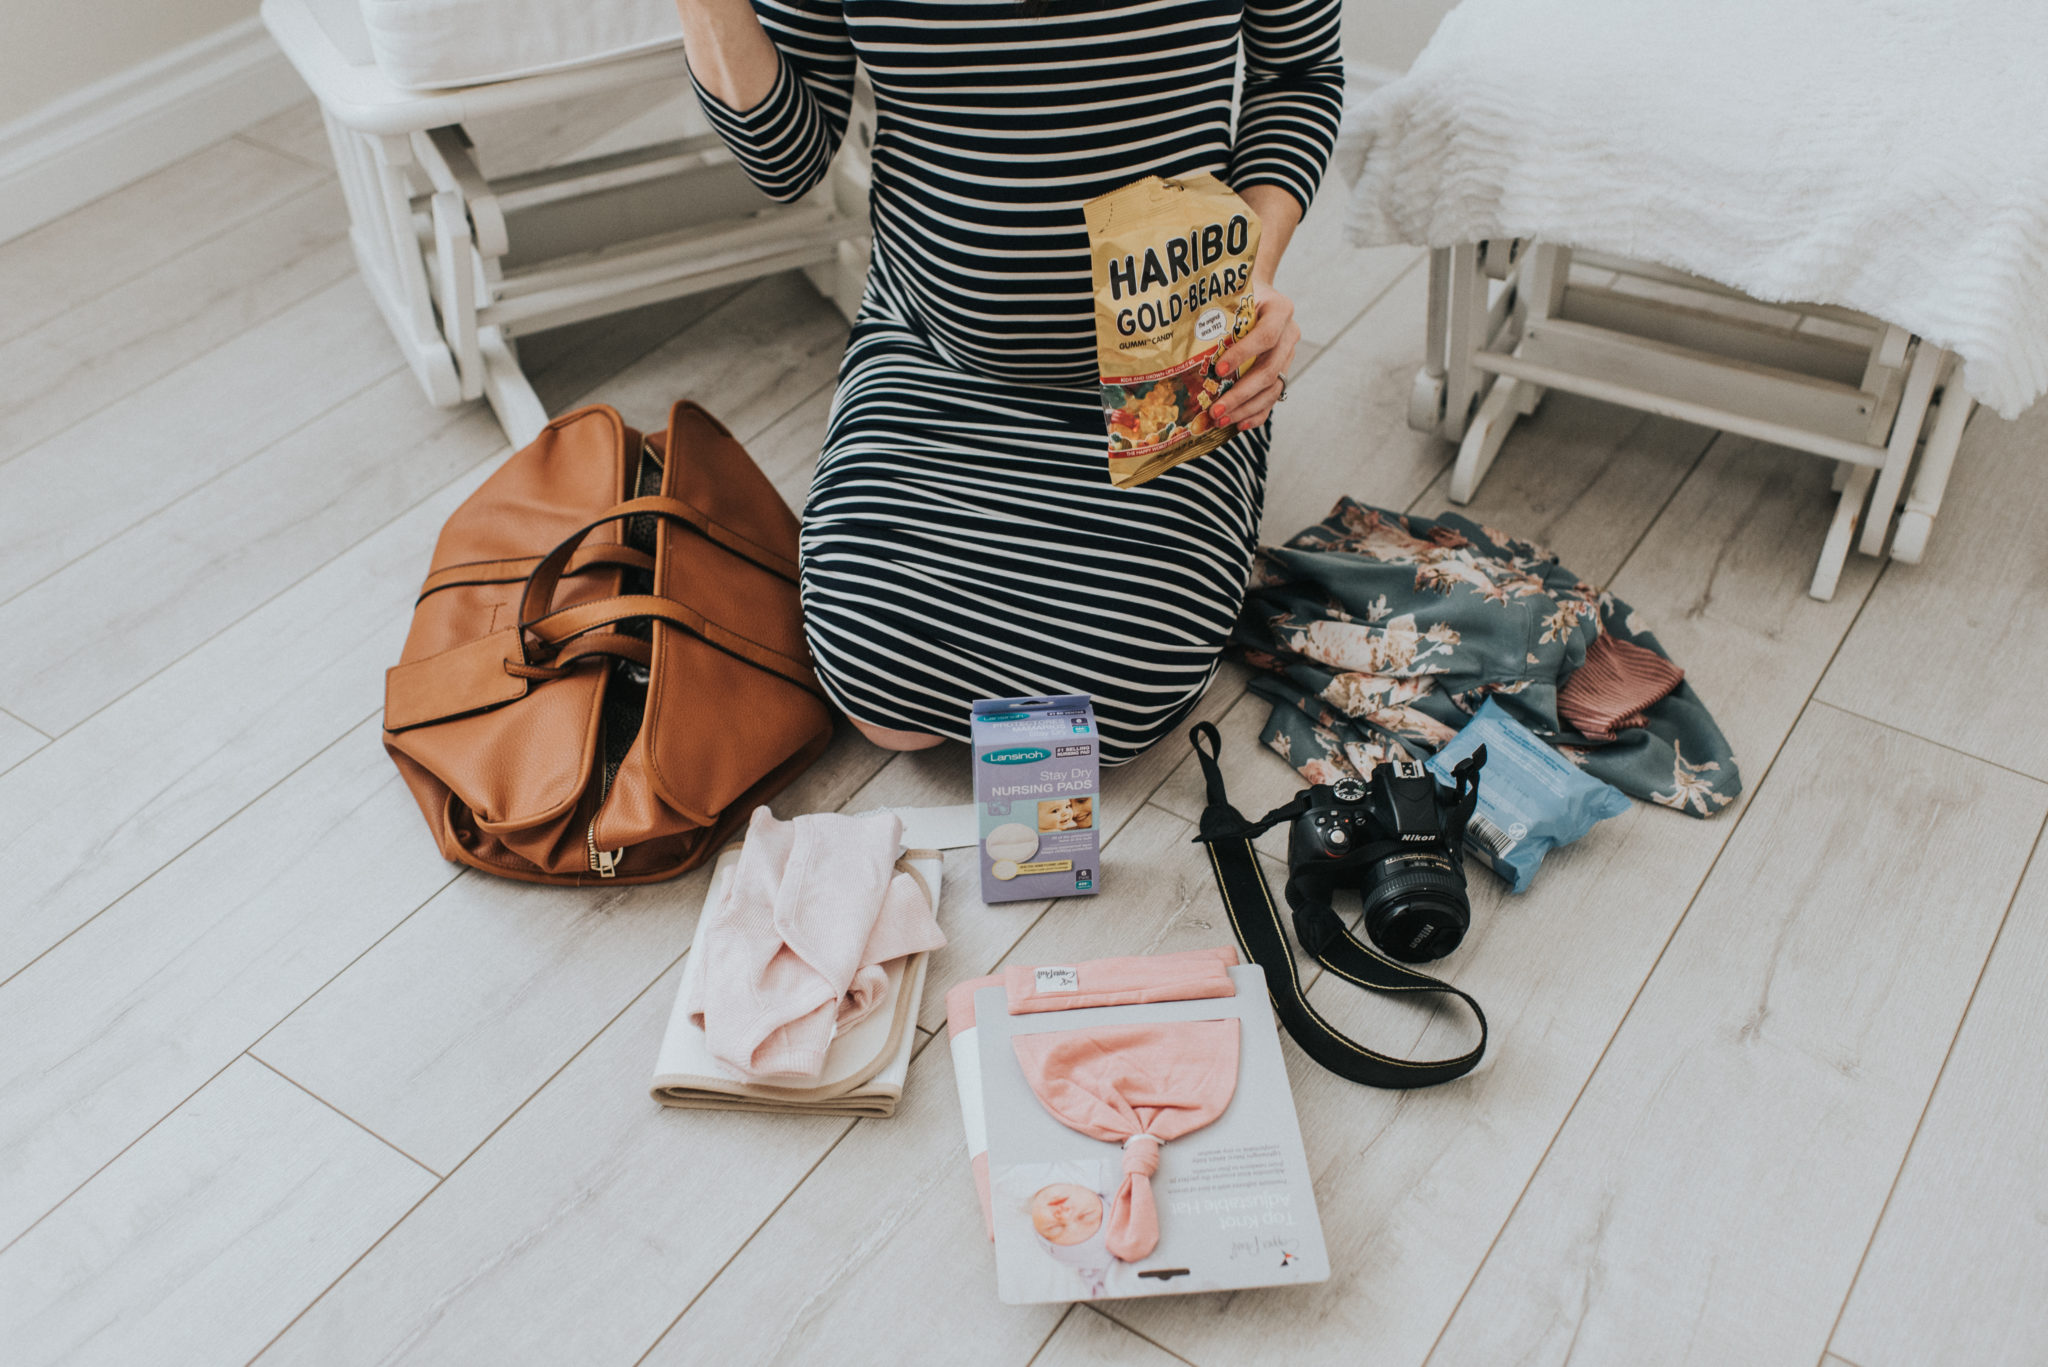 Hospital Bag Essentials by popular Las Vegas mom blogger Outfits & Outings